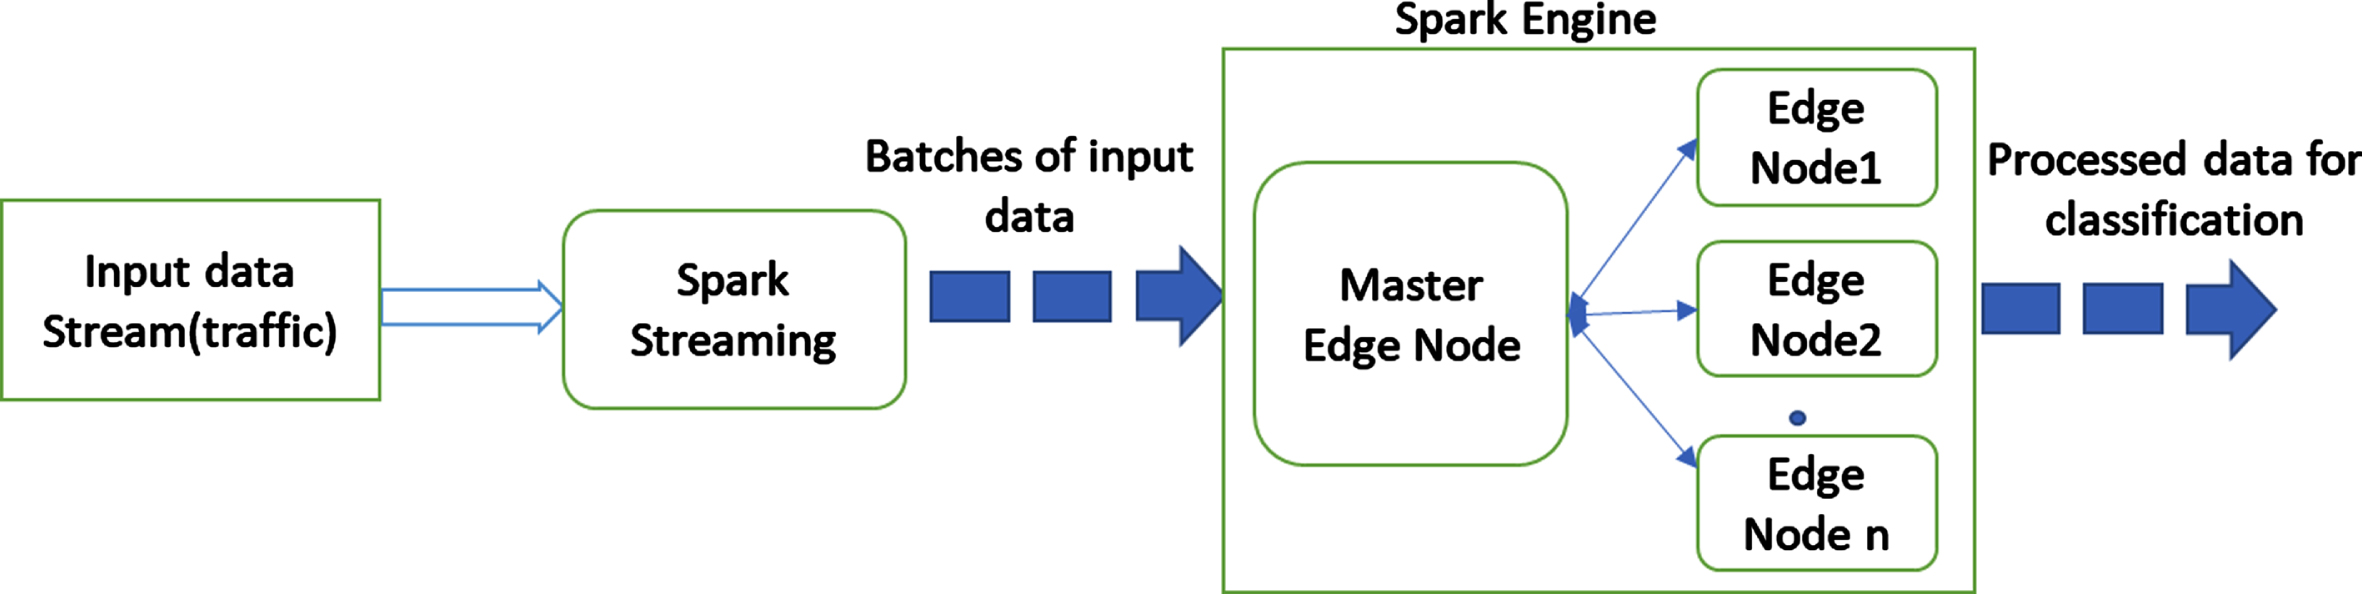 Diagram of pre-processing steps used in spark.